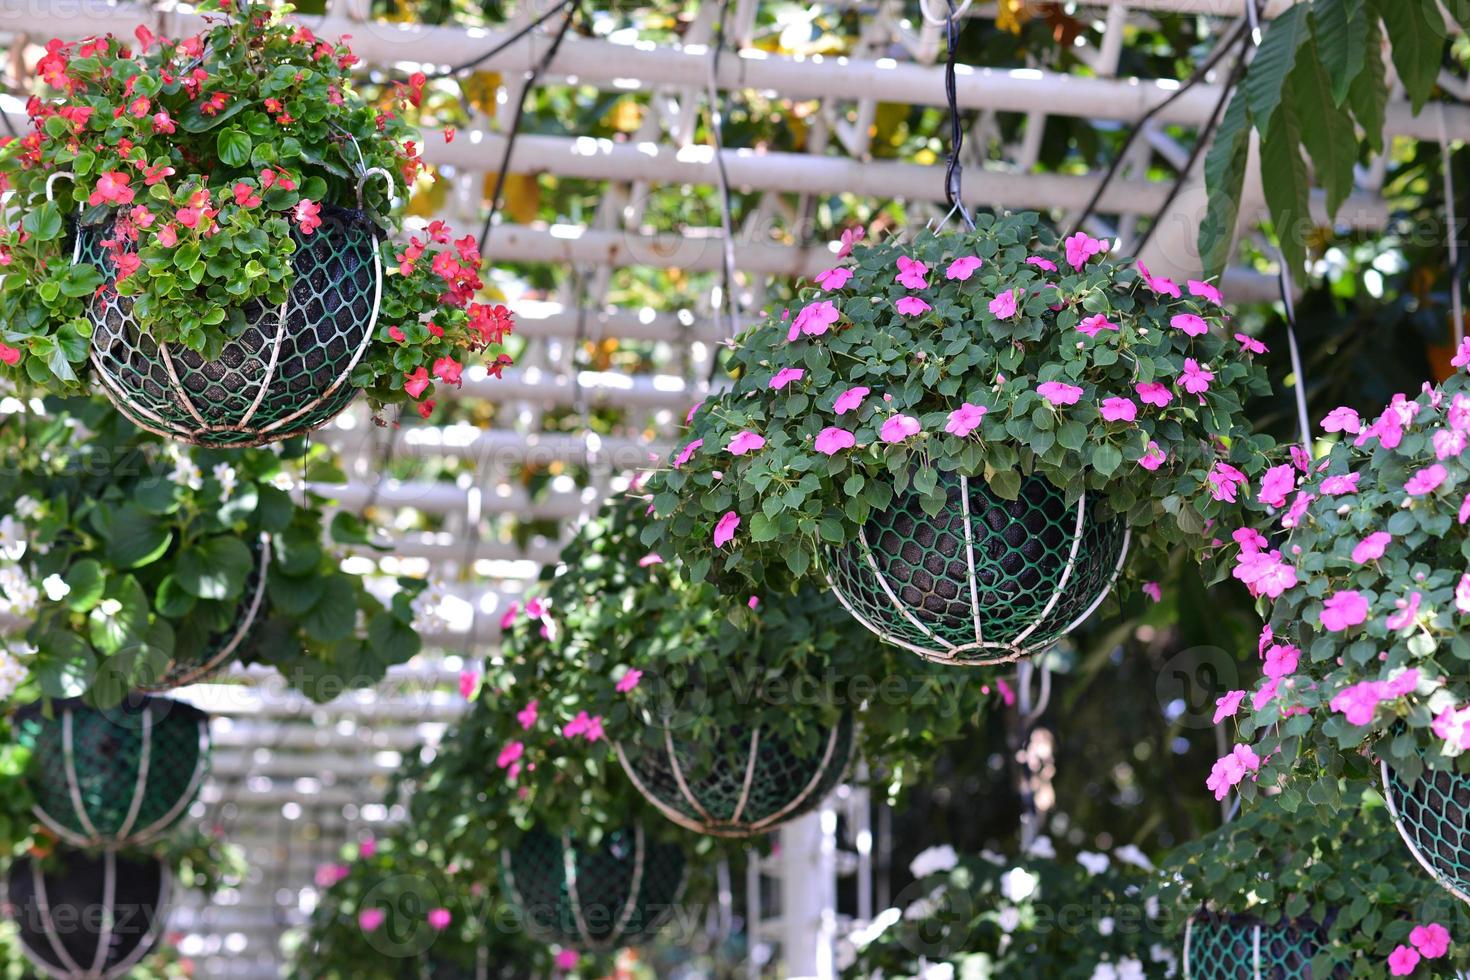 tidy Potted flowers hangging in the garden photo